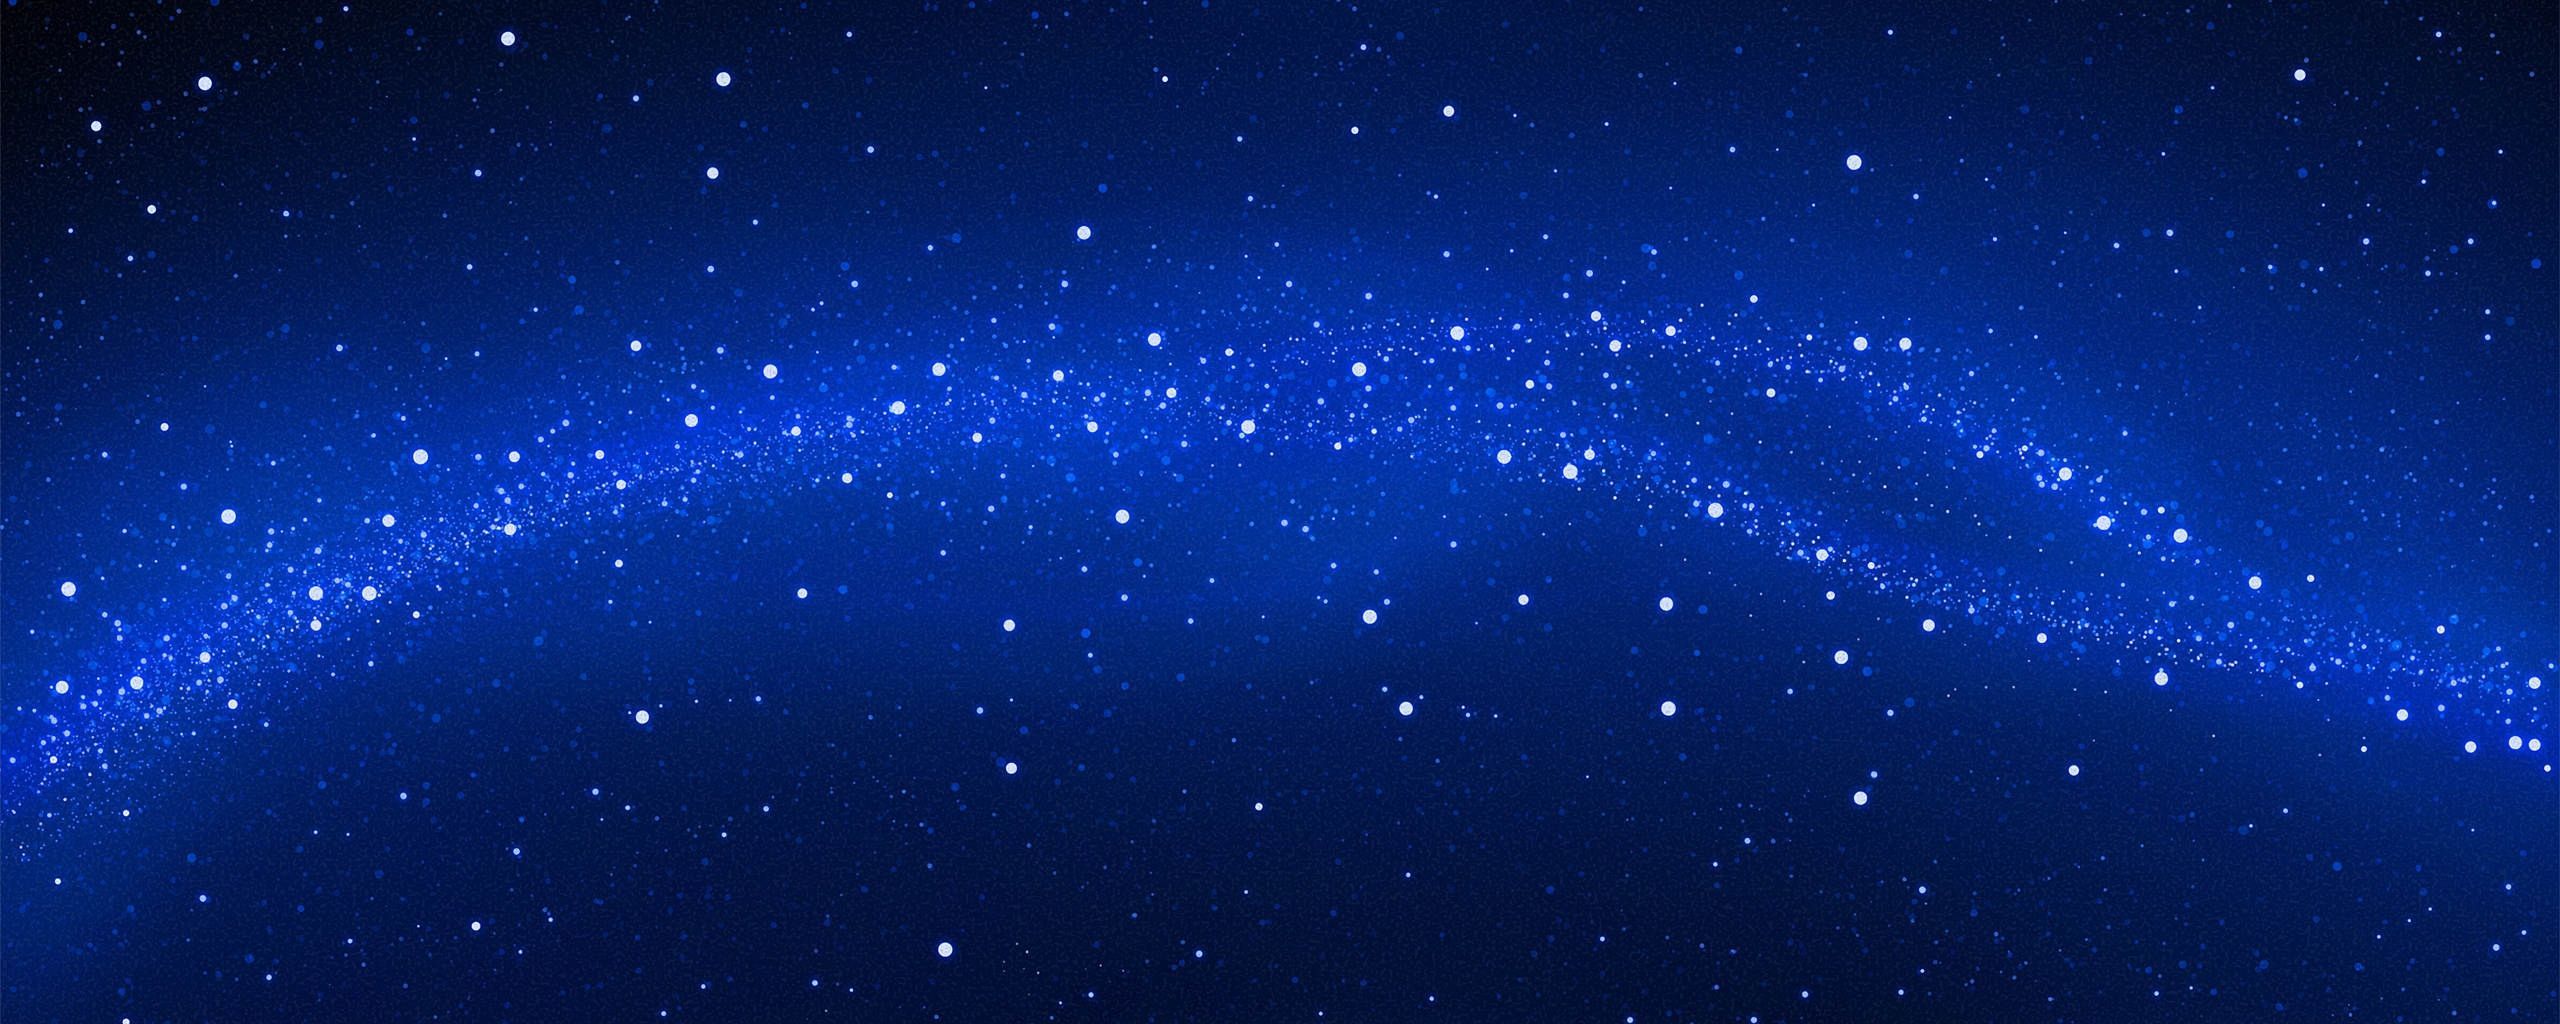 Download Wallpaper 2560x1024 Space, Stars, Blue background Dual ...